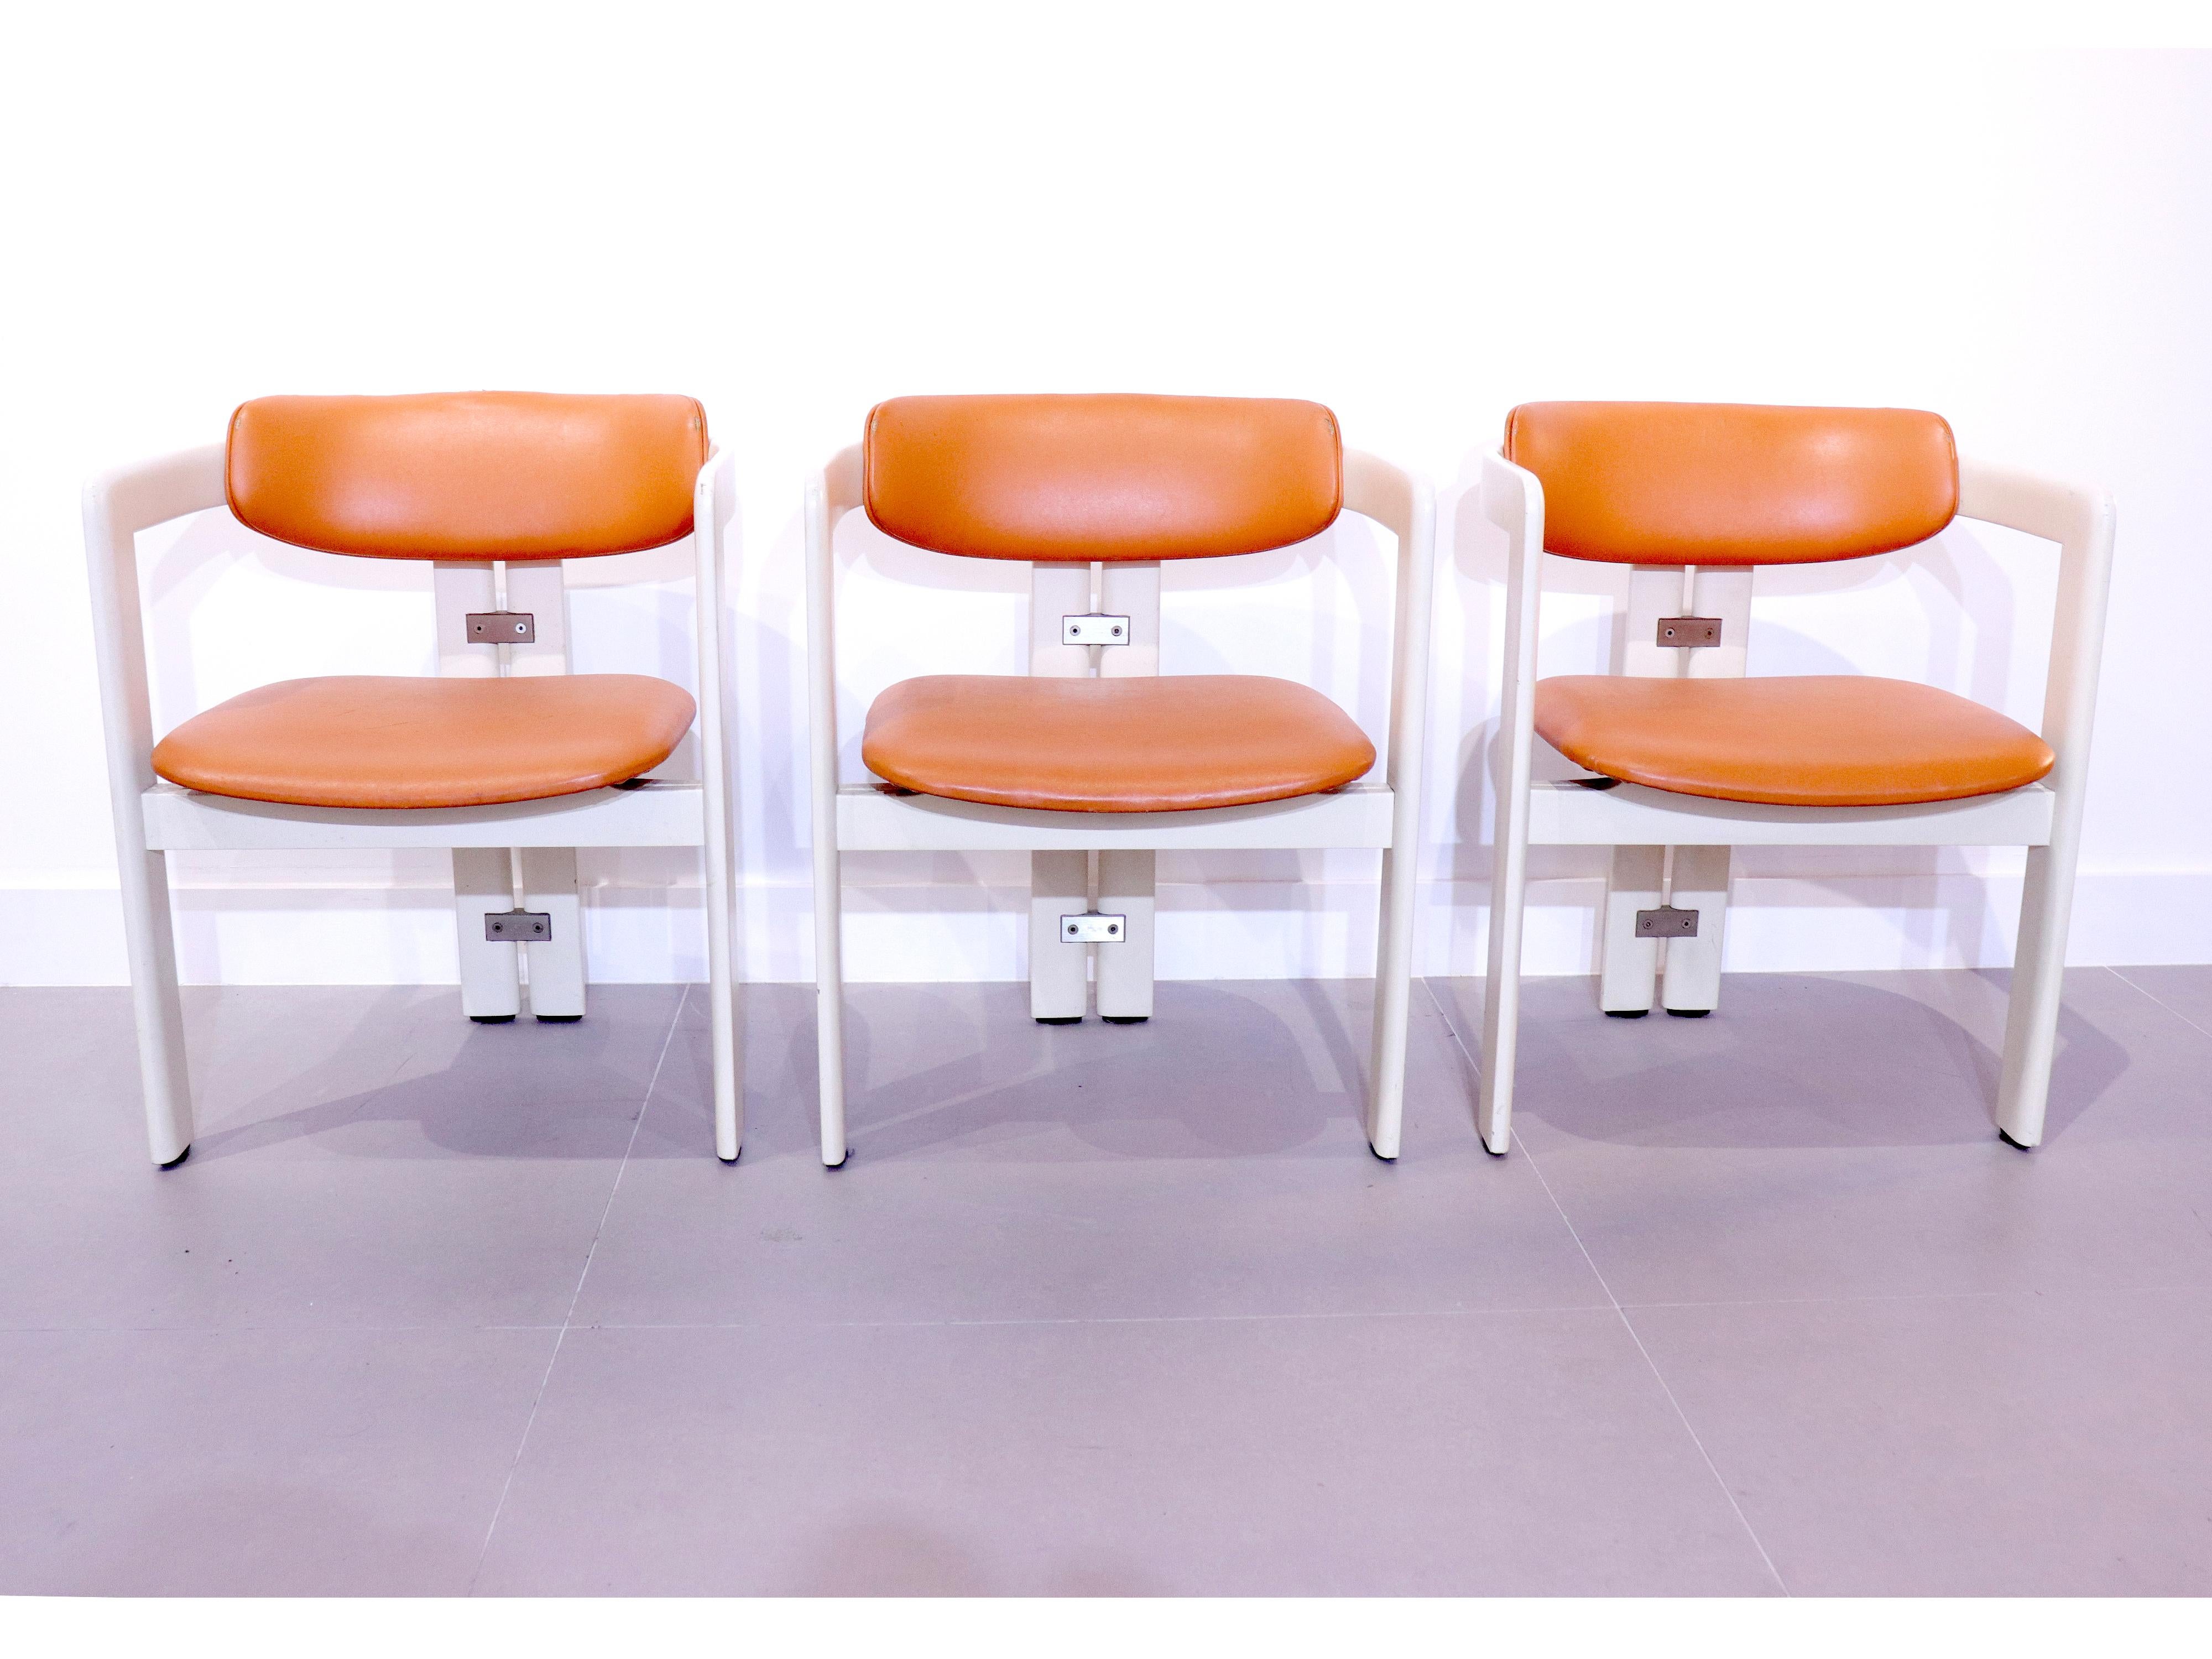 Rare set of Six Pamplona Chairs by Augusto Savini for Pozzi, Italy 1965.
These armchairs feature white lacquered wood with their original orange upholstery.
An Iconic and instantly recognisable design, simplistic yet strong in shape with their